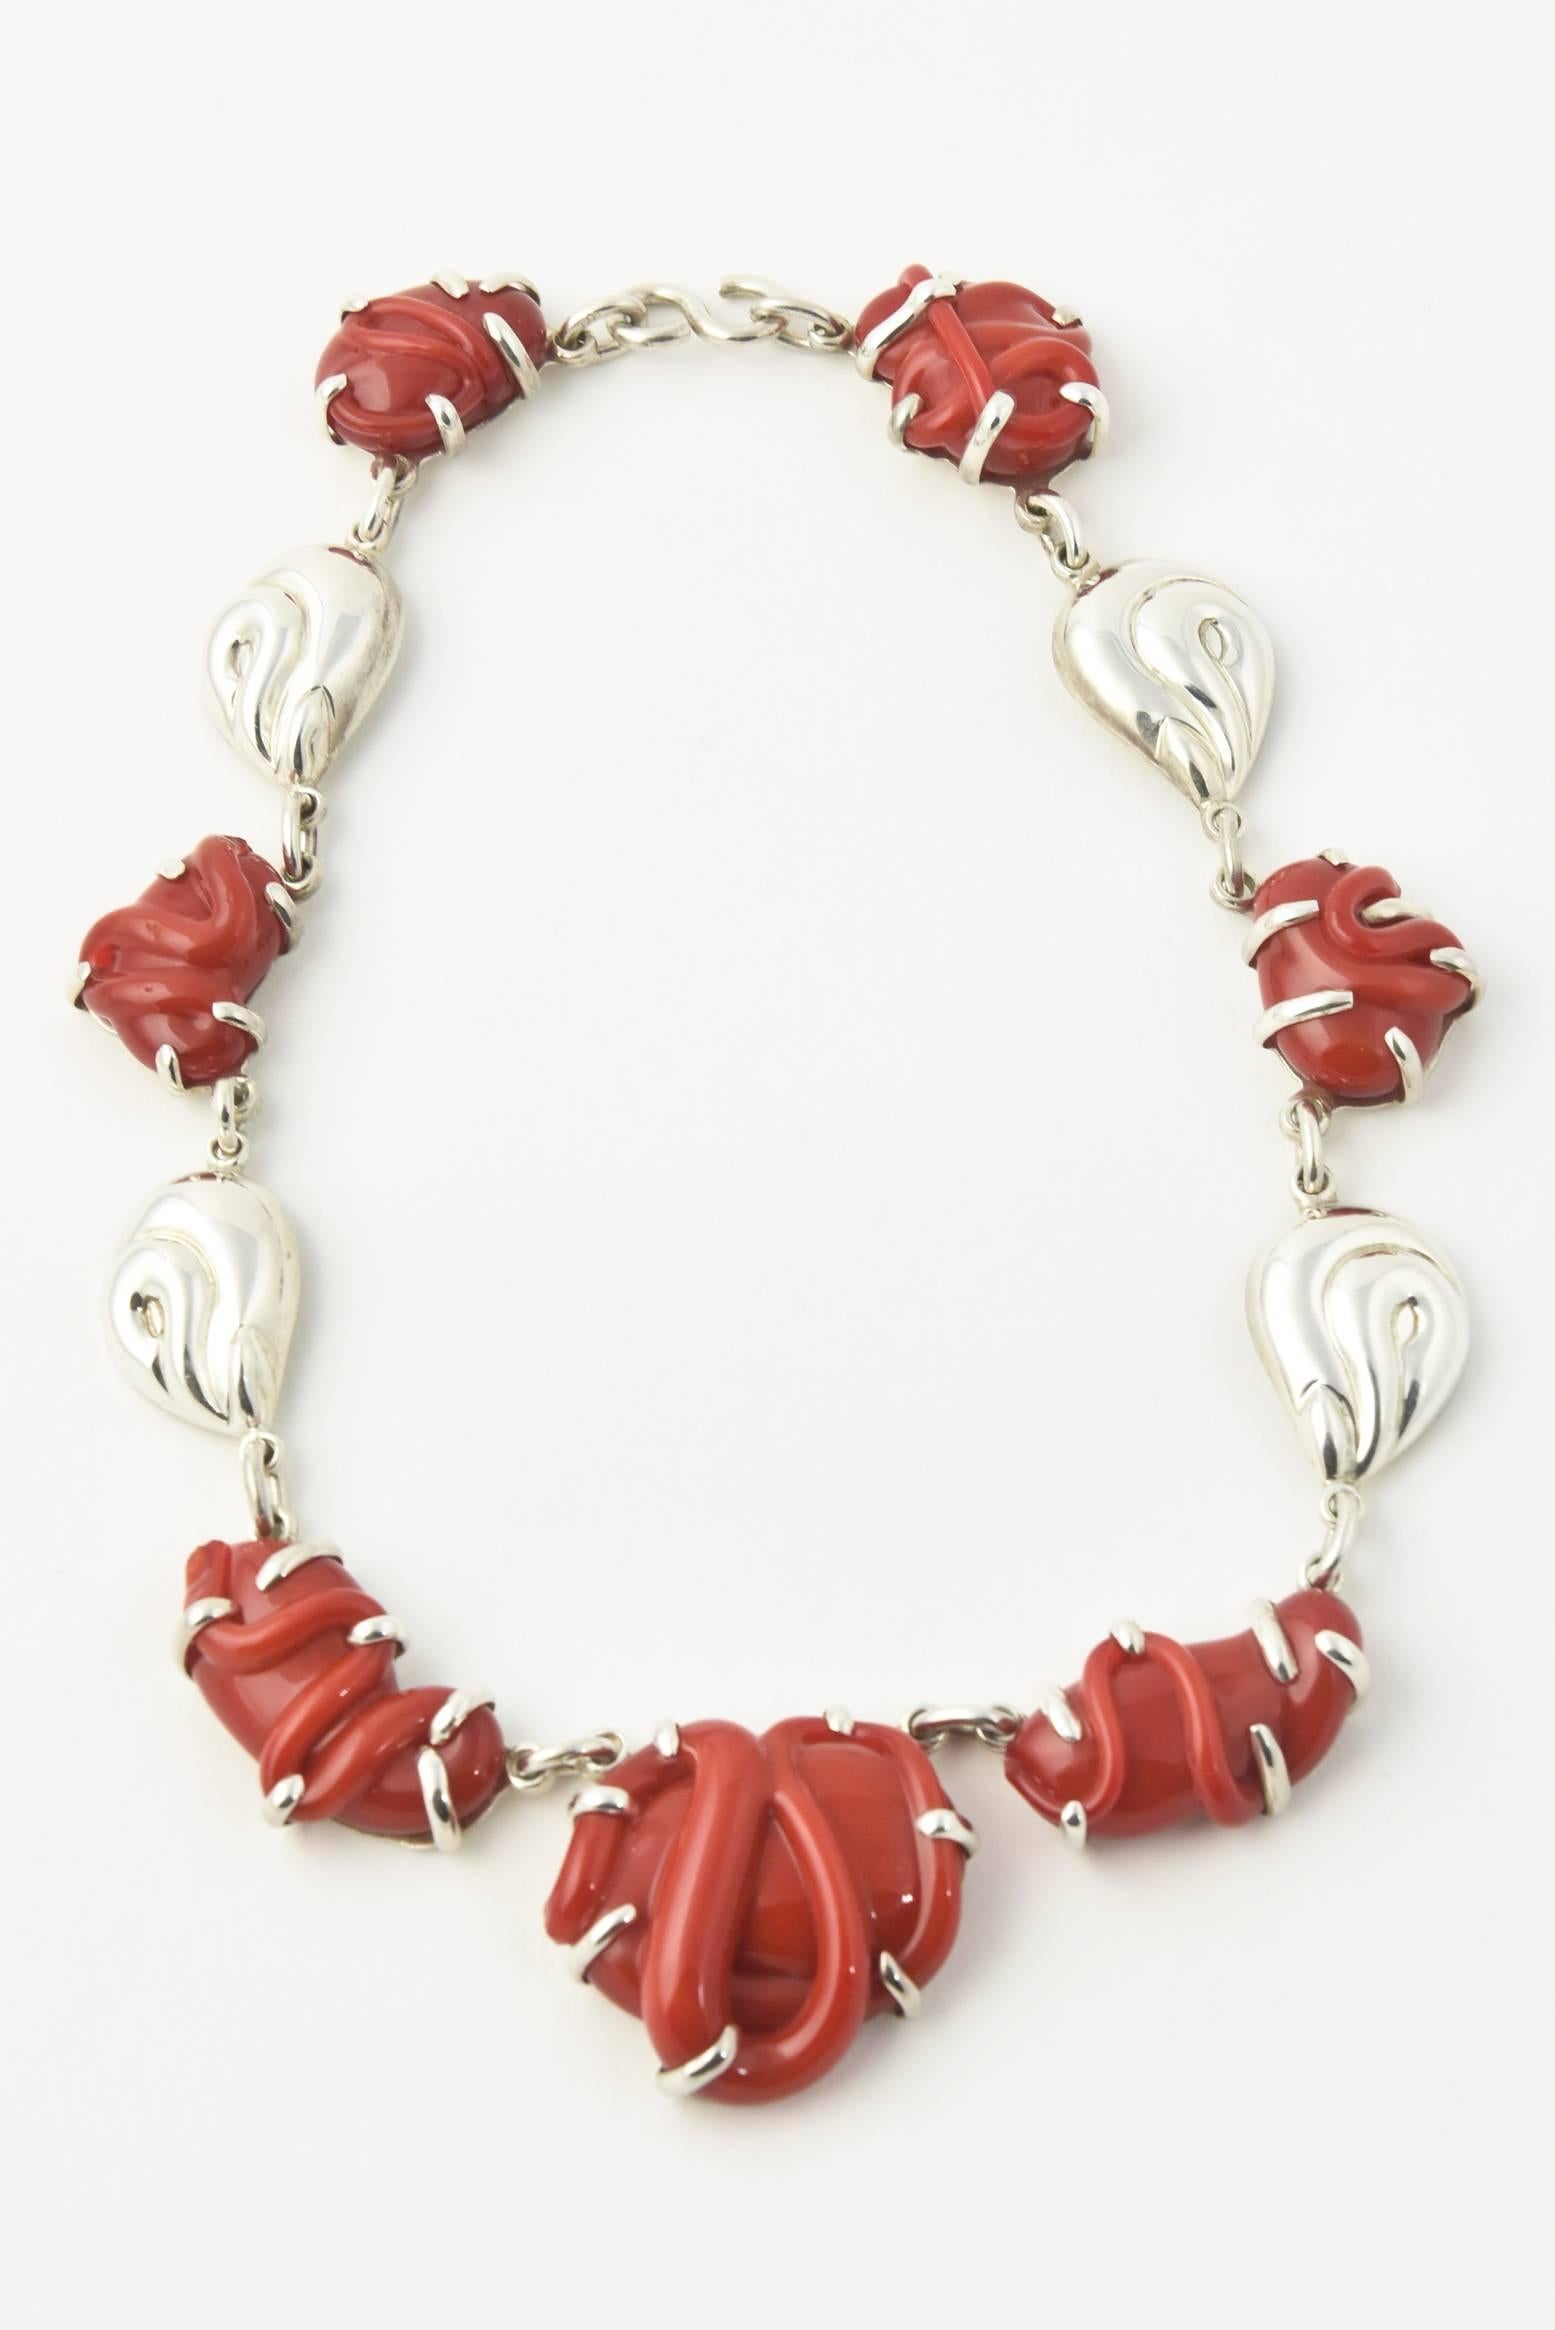 Coral Glass & Sterling Set - Earrings, Necklace & Bracelet by Marquita Masterson 1